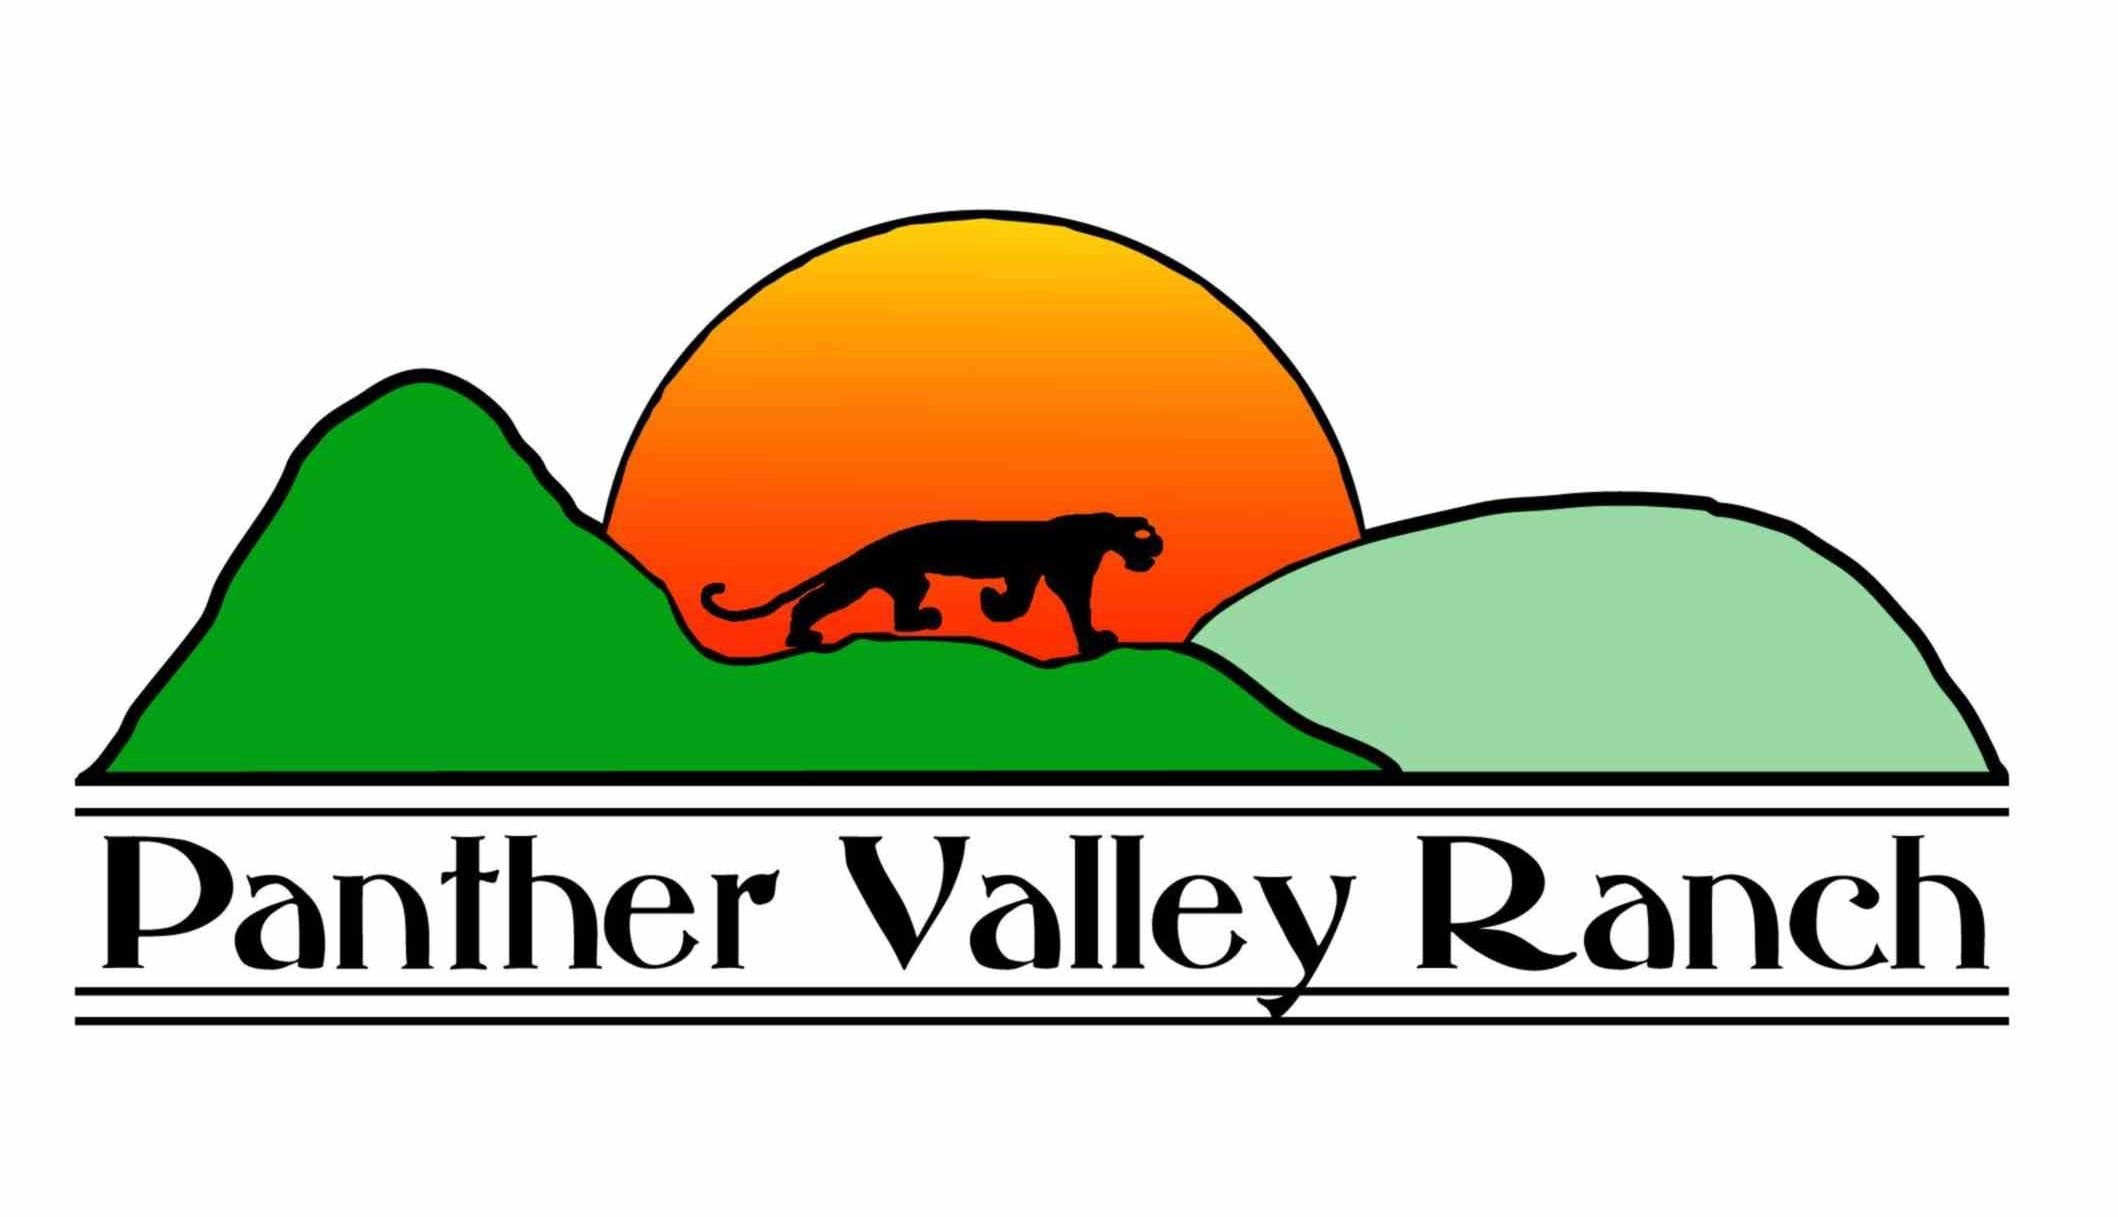    Panther Valley Ranch